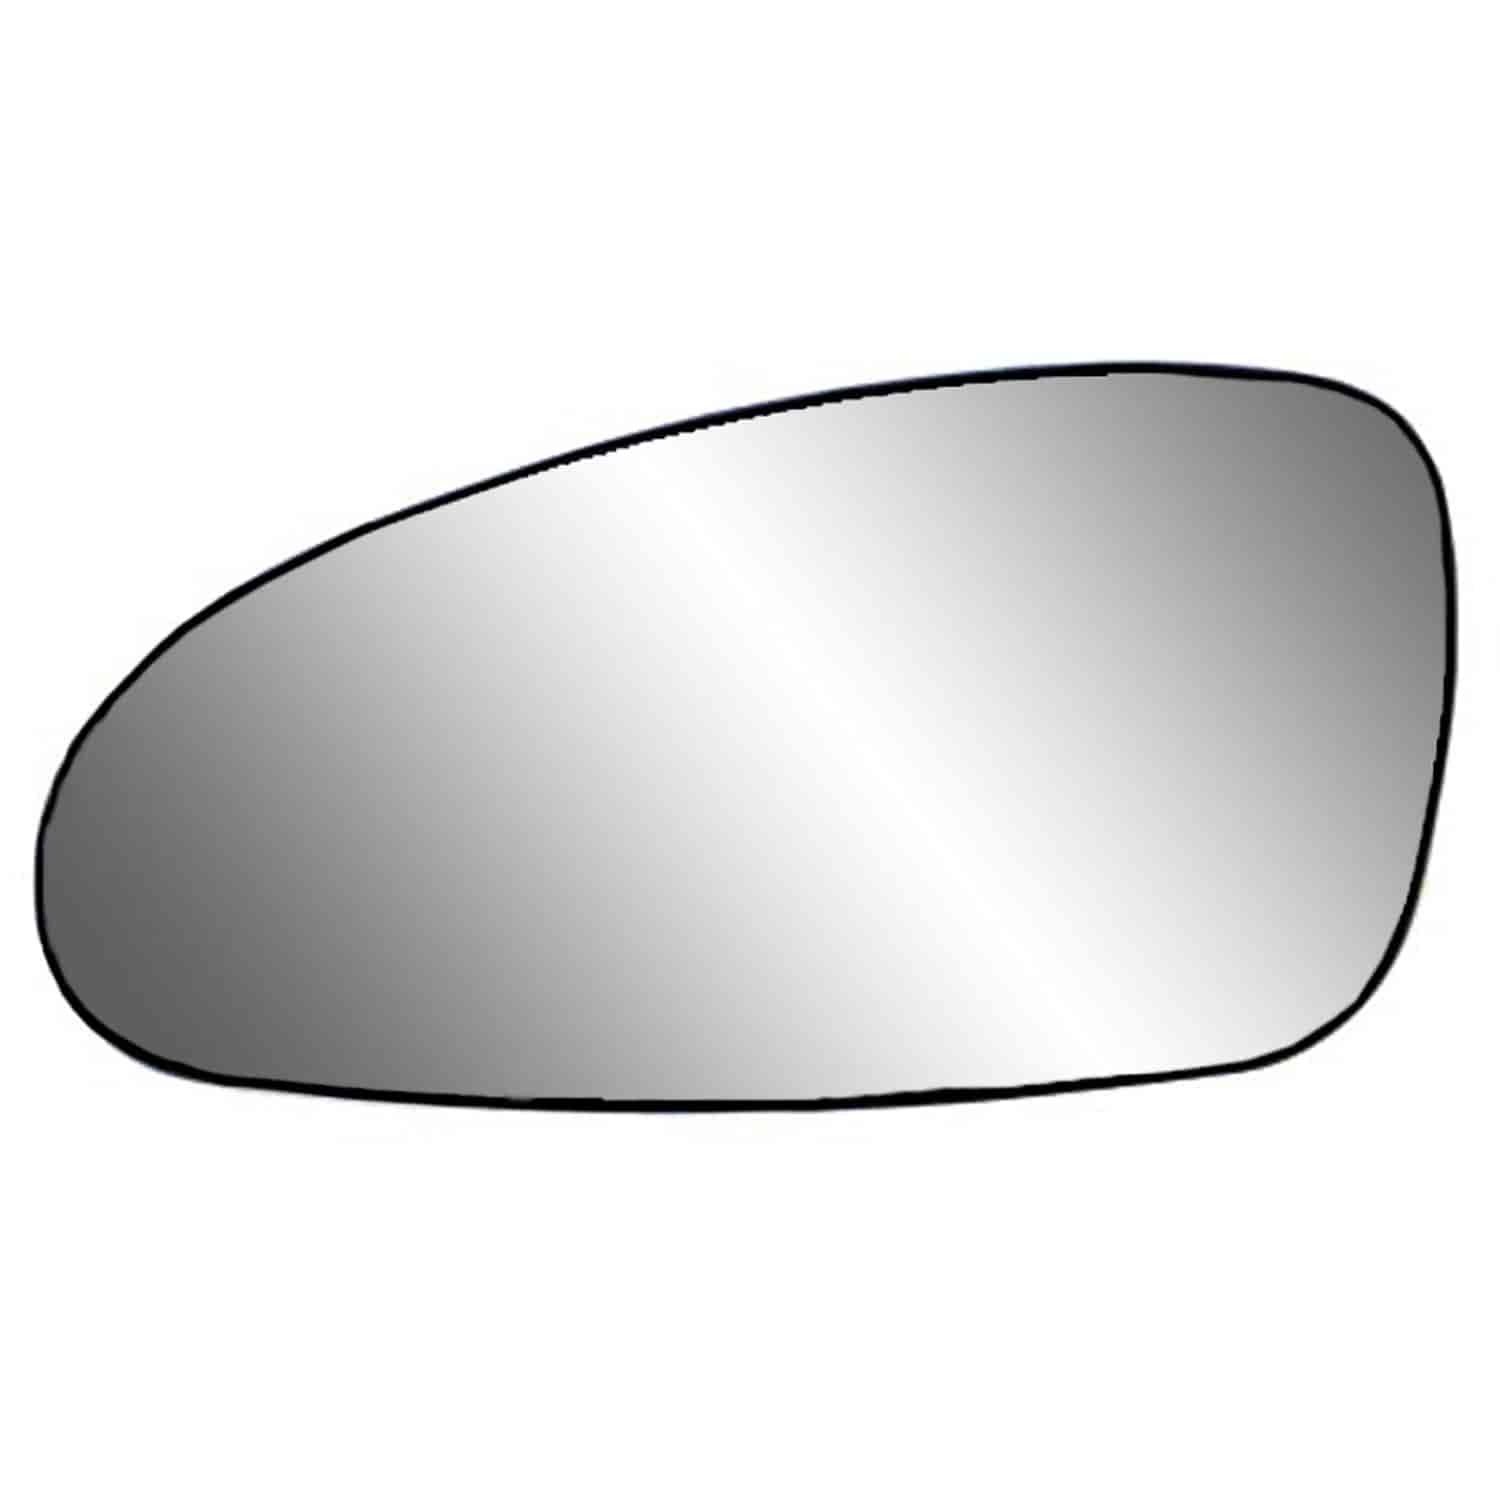 Replacement Glass Assembly for 00-07 Monte Carlo replace your cracked or broken driver side mirror g